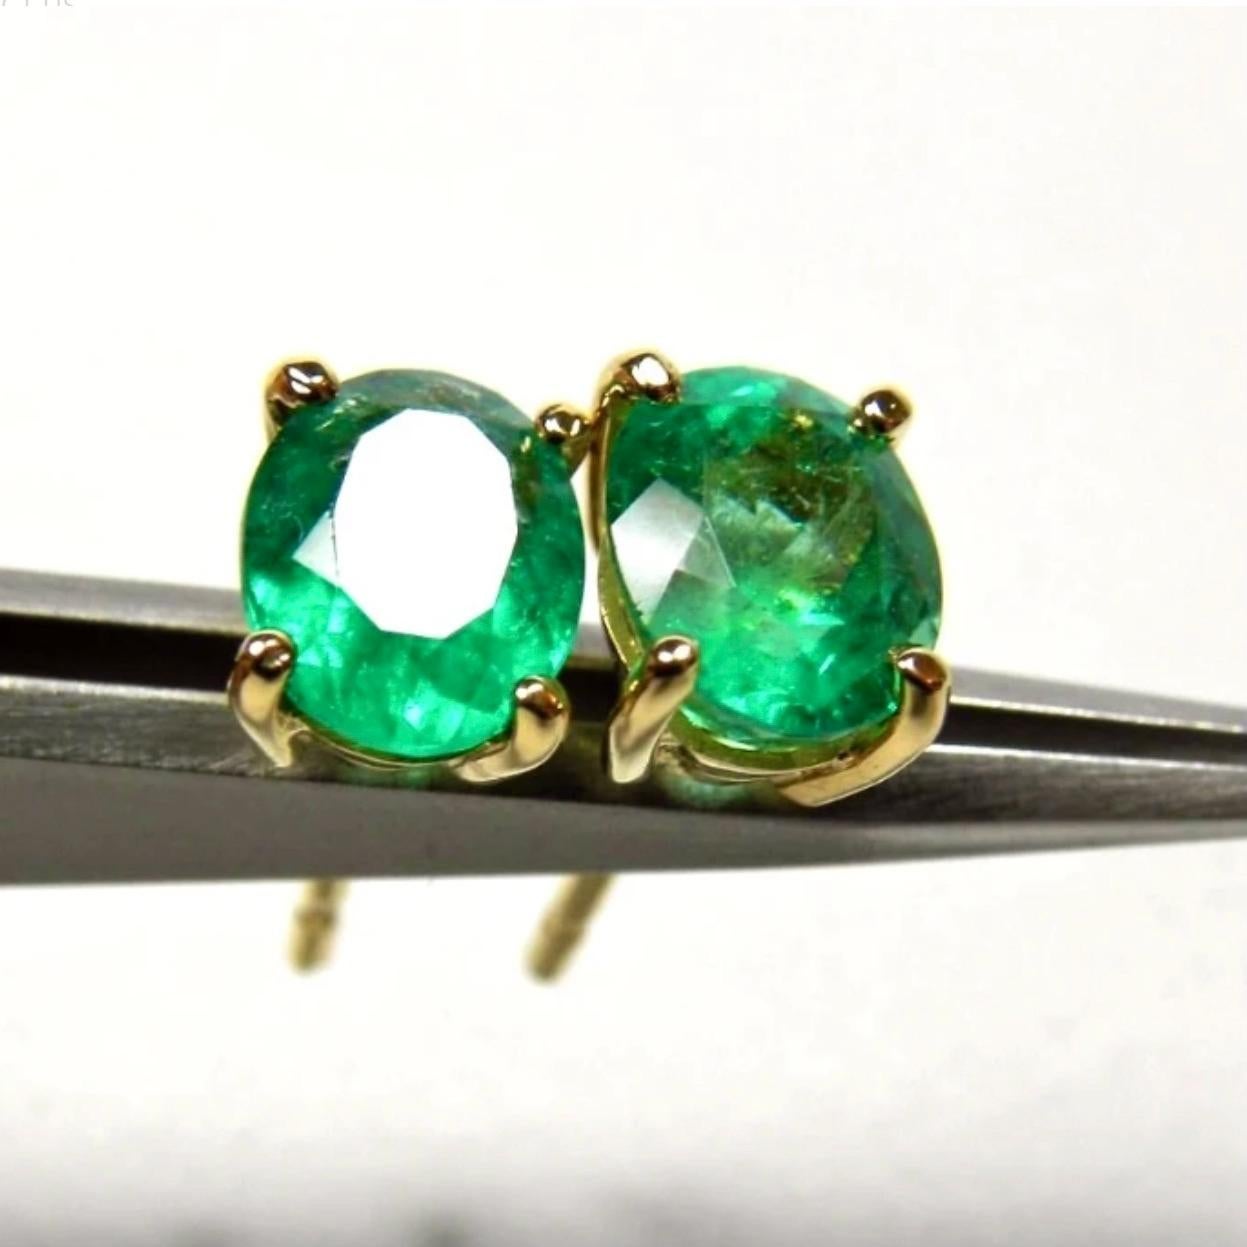 These stunning Colombian emerald Stud earrings have been crafted in 18K yellow gold.
Shape or Cut Emeralds: Oval Cut
Average Color/Clarity : Beautiful Medium Green/ Clarity, VS
Total Weight Emeralds: Approx. 1.50Carats (2 emeralds)
Total Gemstones